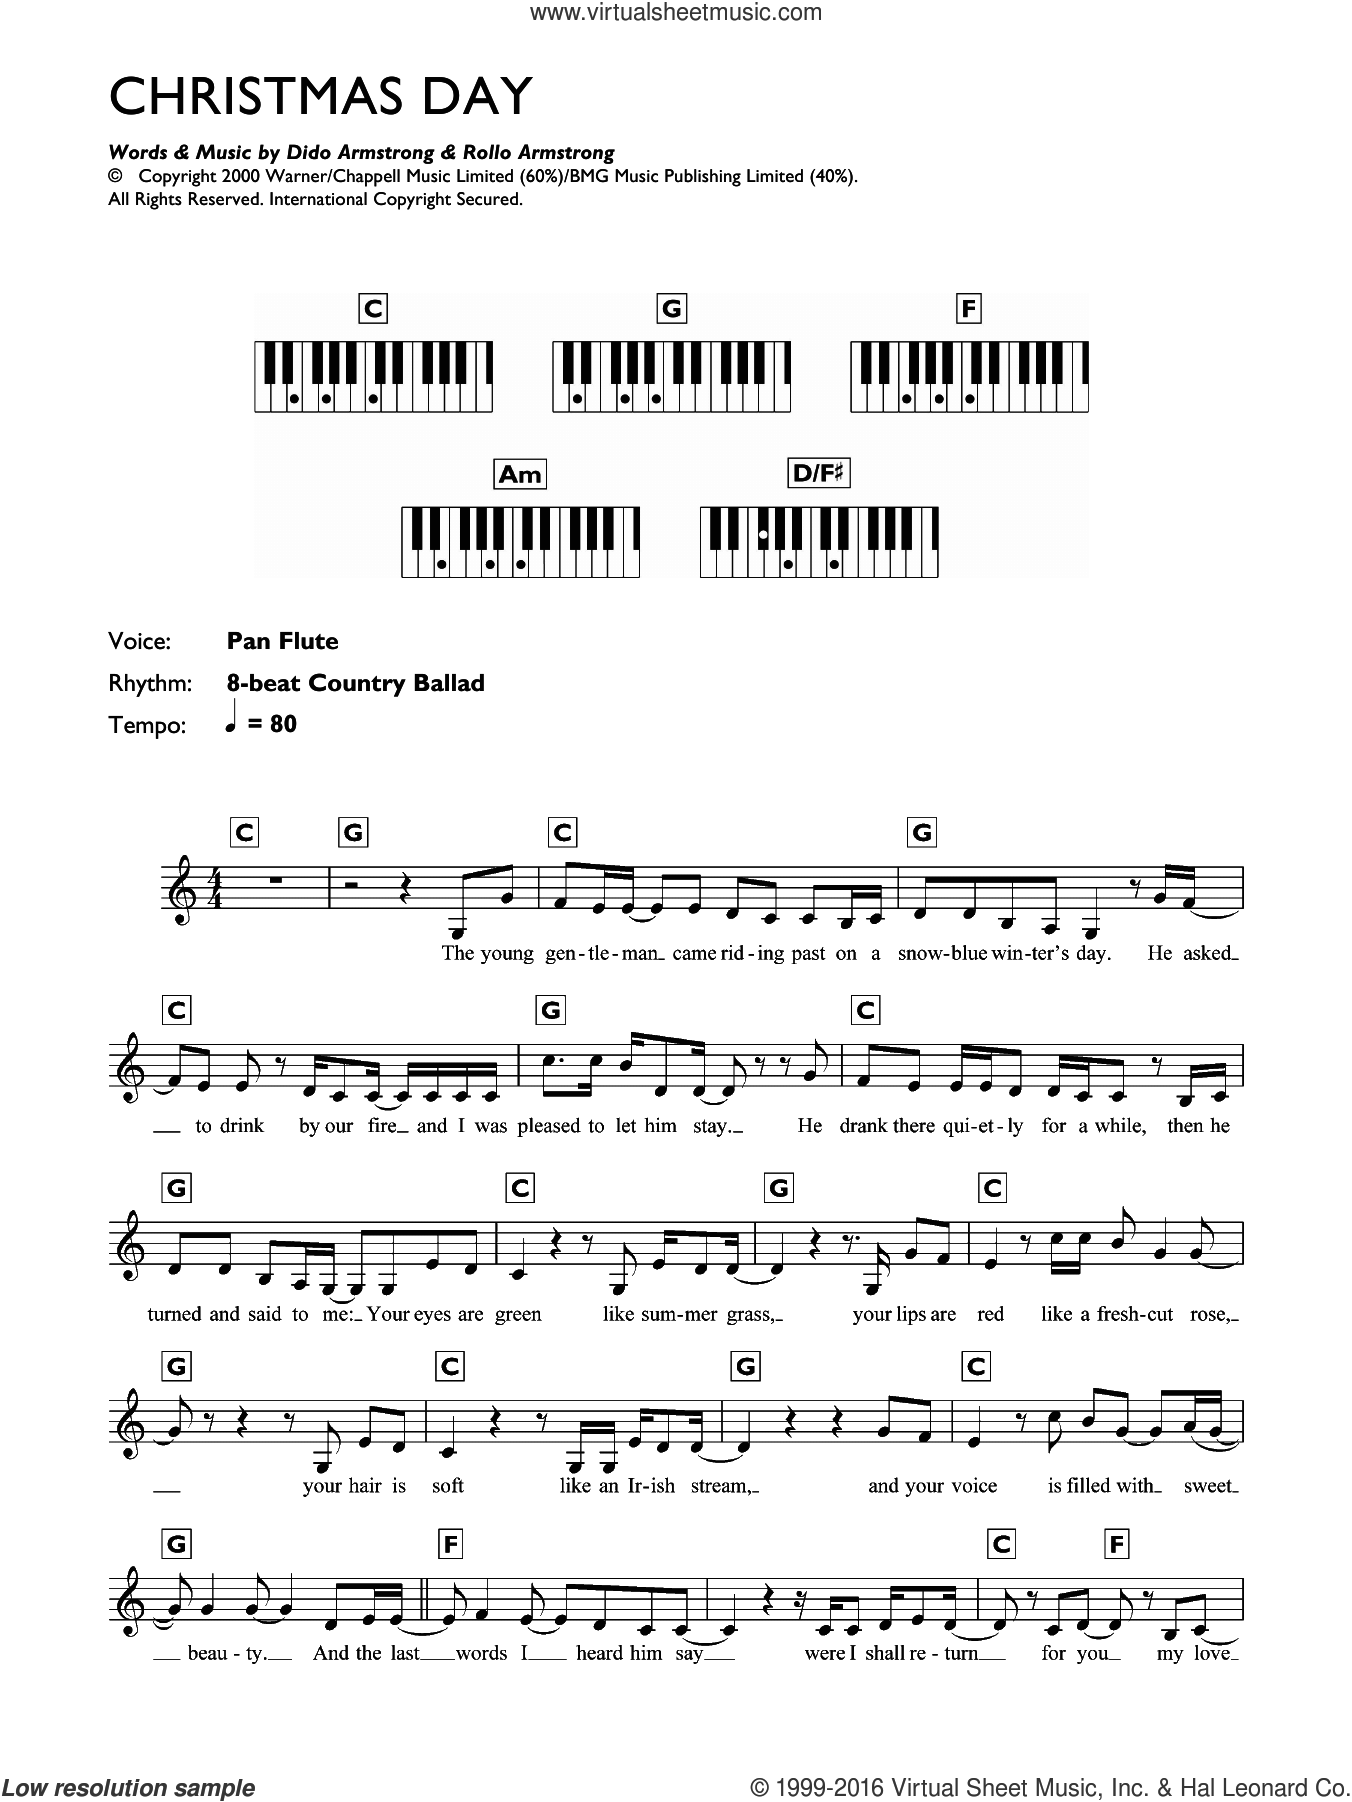 Armstrong - Christmas Day sheet music for piano solo (chords, lyrics, melody)